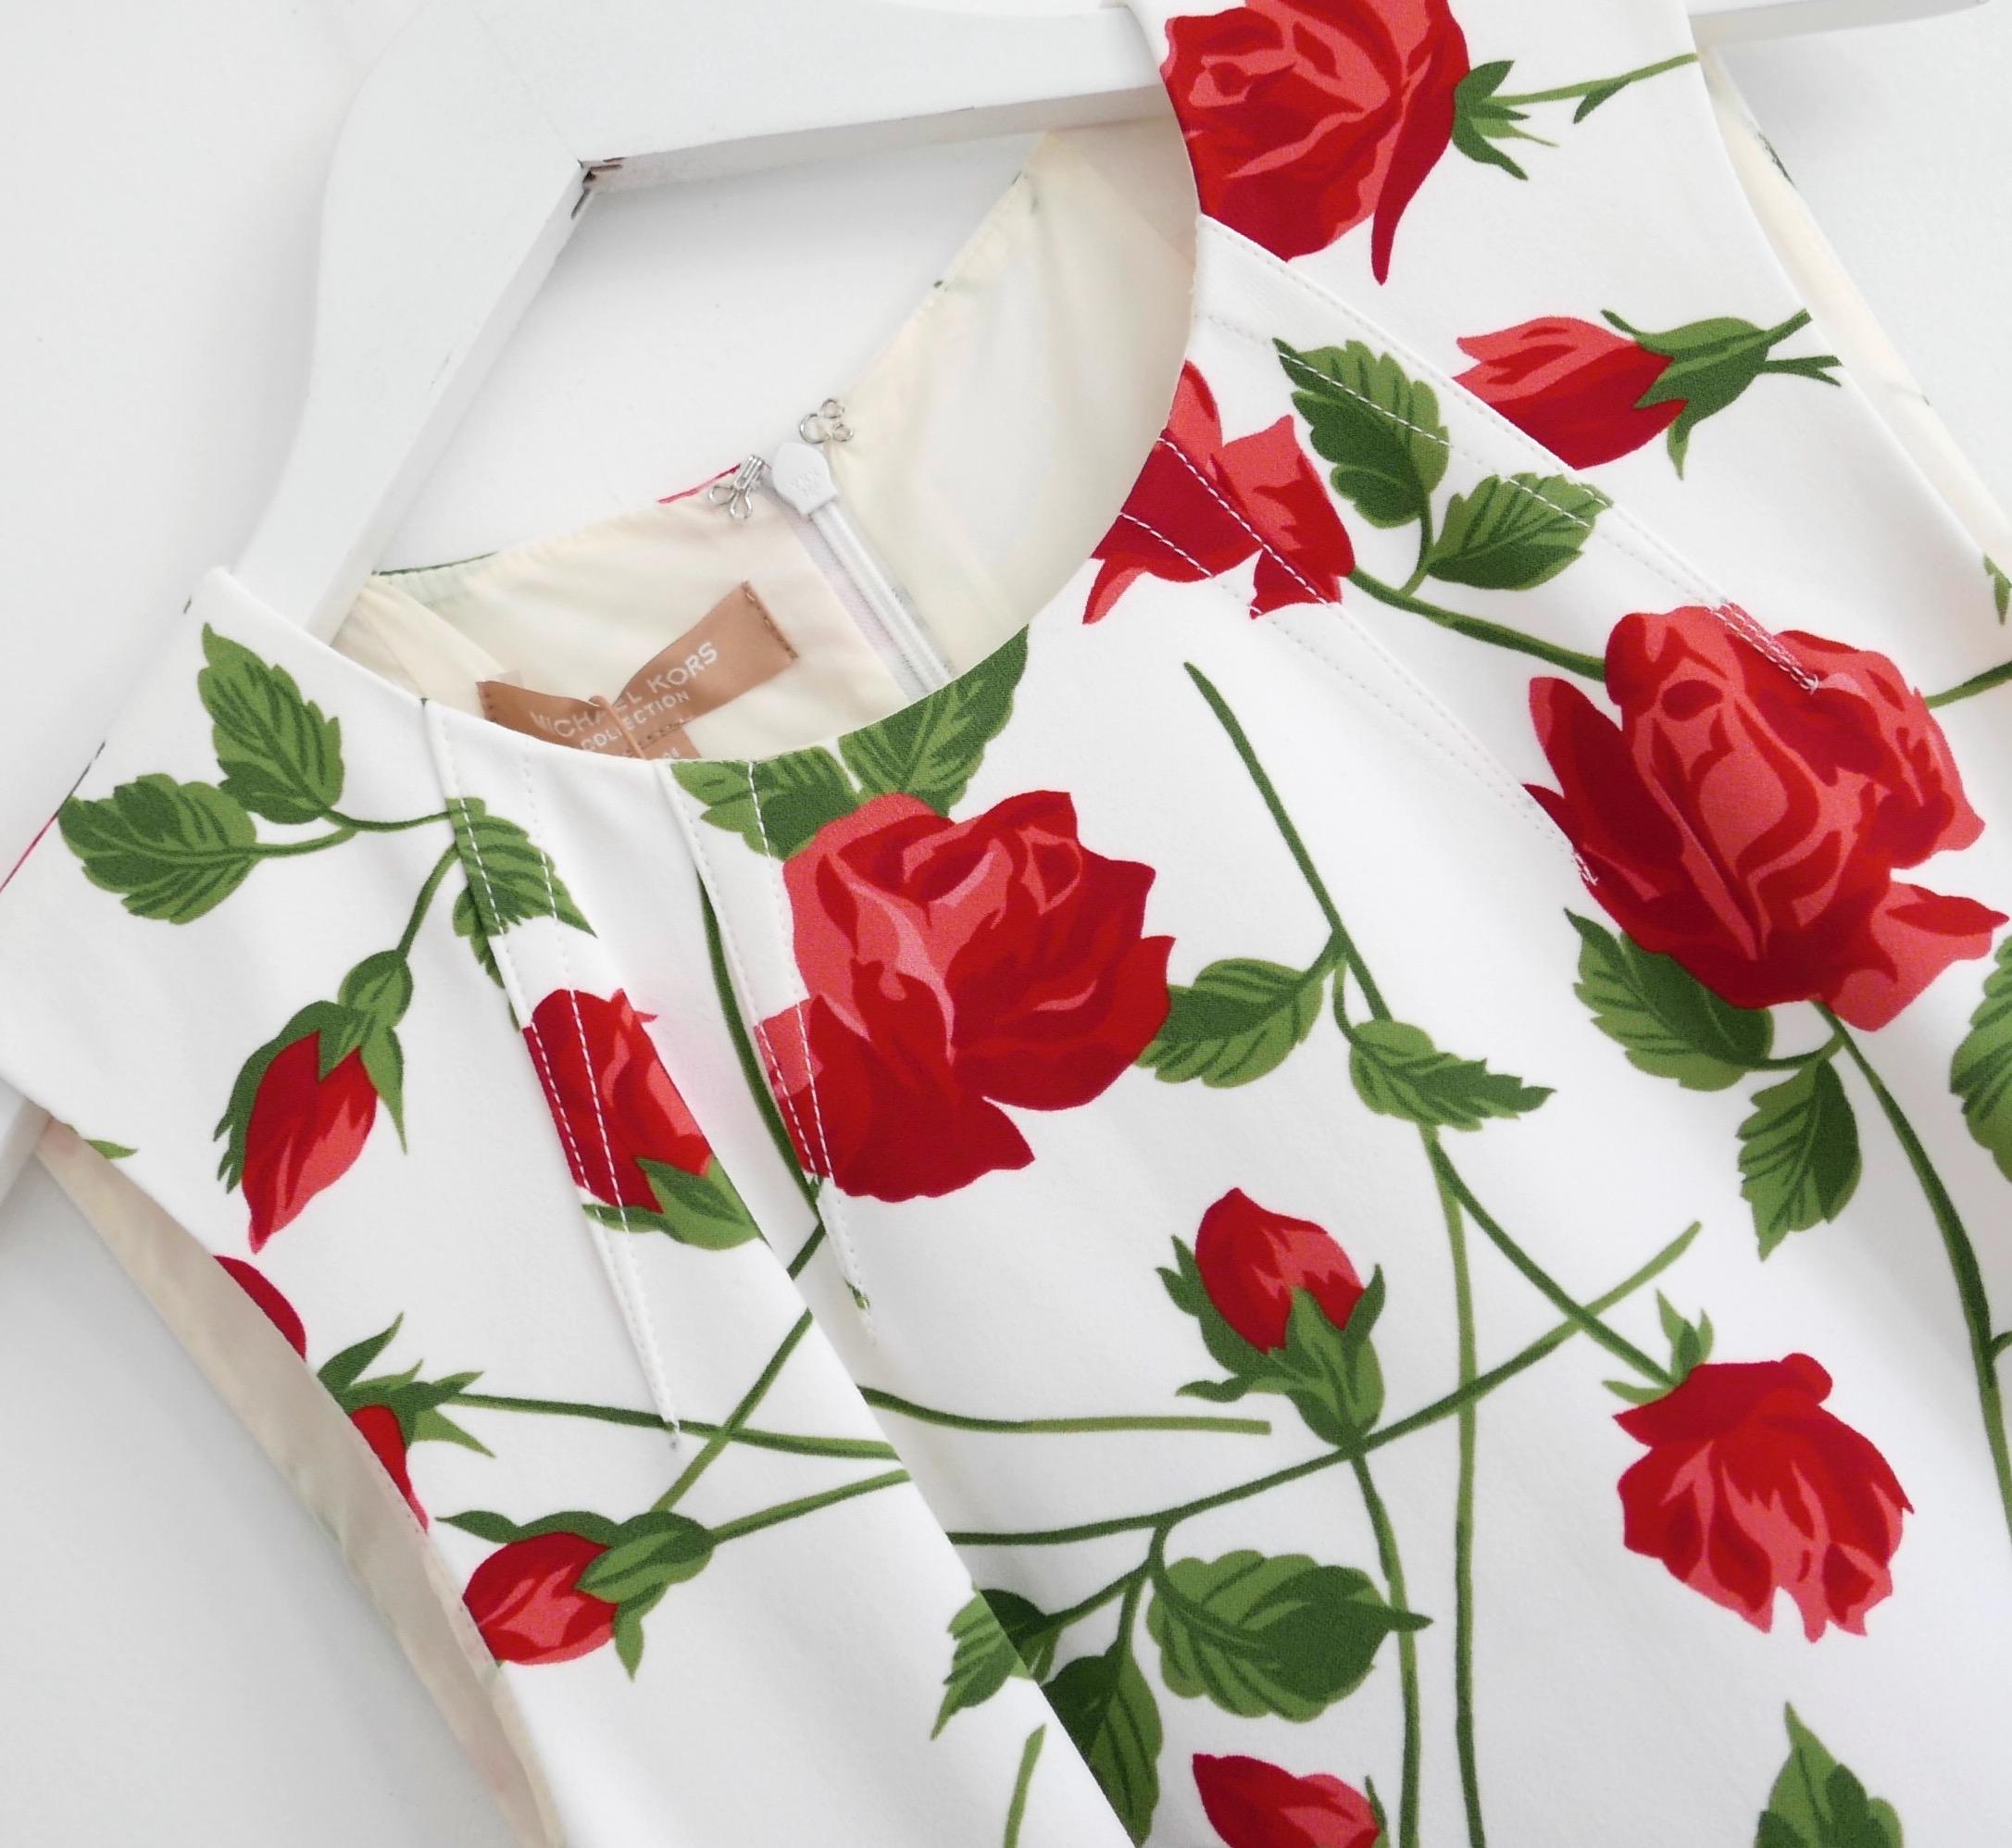 Absolutely gorgeous Michael Kors Collection rose print dress - bought for £1750 and new with tags. Made from smooth, stretchy rayon and elastane crepe with a vivid crimson red rose print on a bright white background. Superbly tailored with the